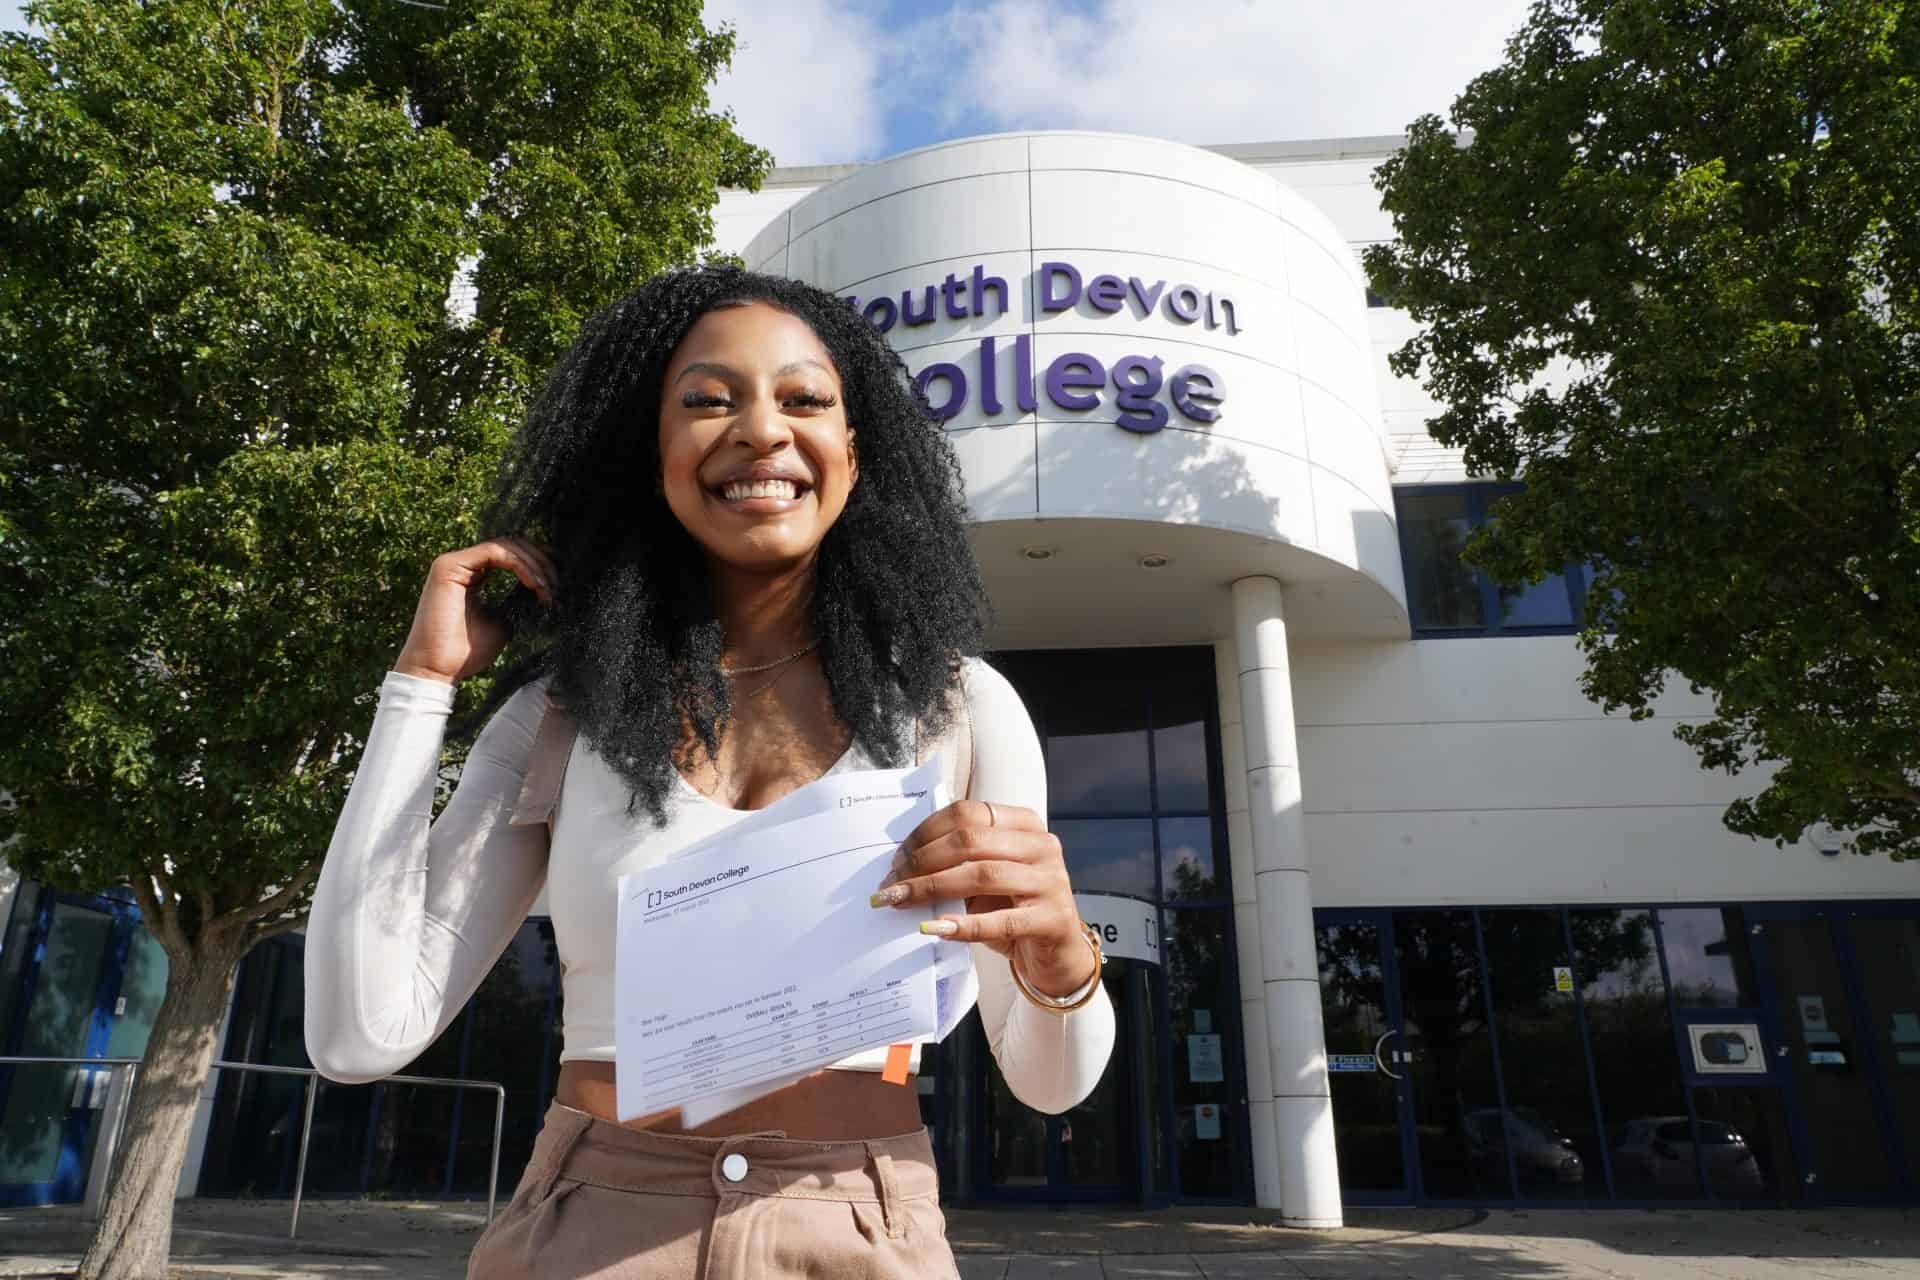 Paige Johnson celebrating on results day outside South Devon College